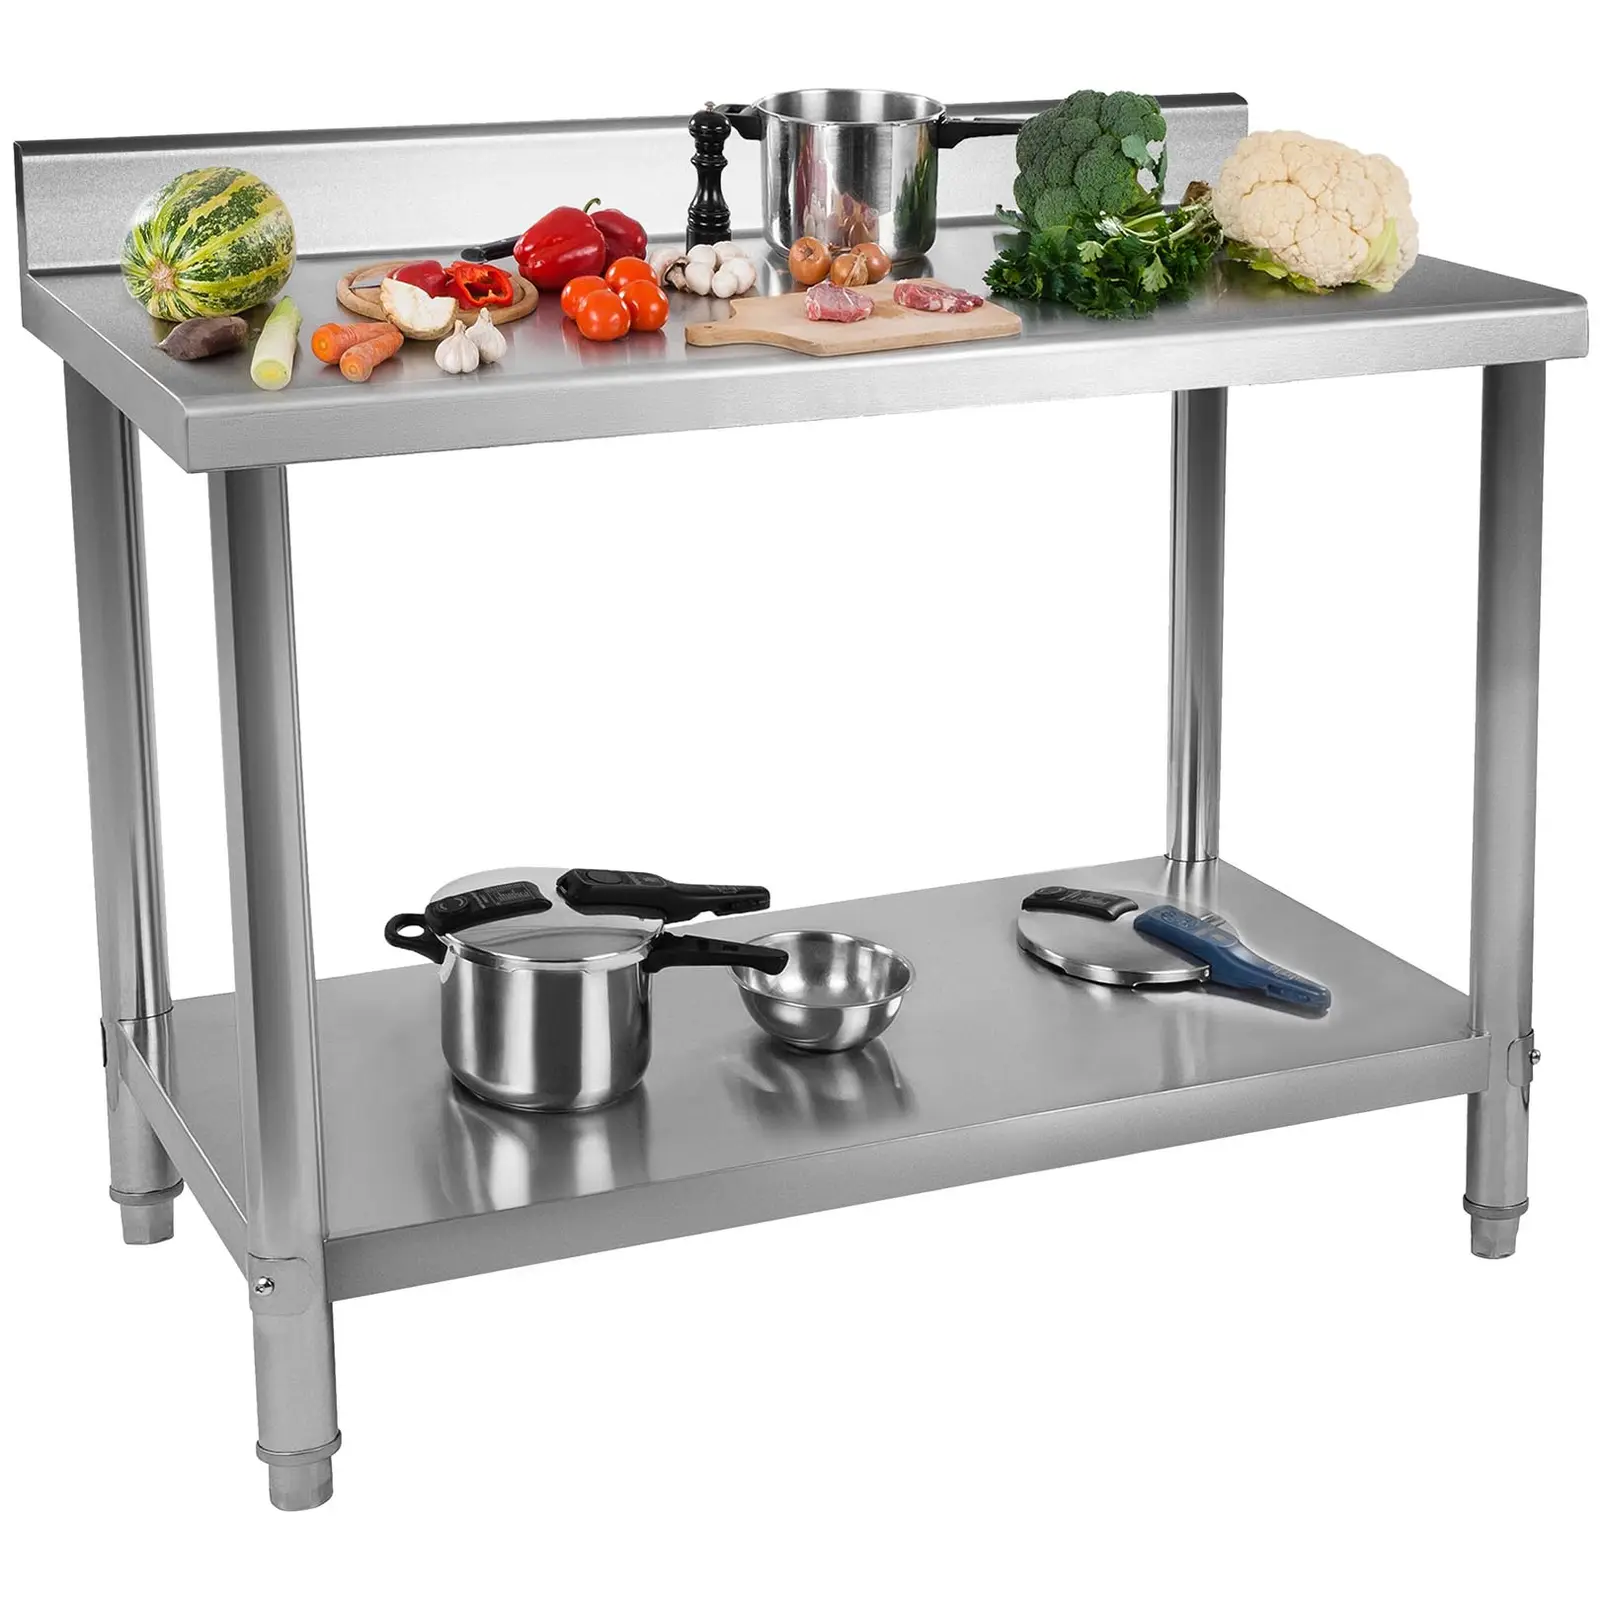 Stainless Steel Work Table - upstand - 100 x 70 cm - 120 kg capacity